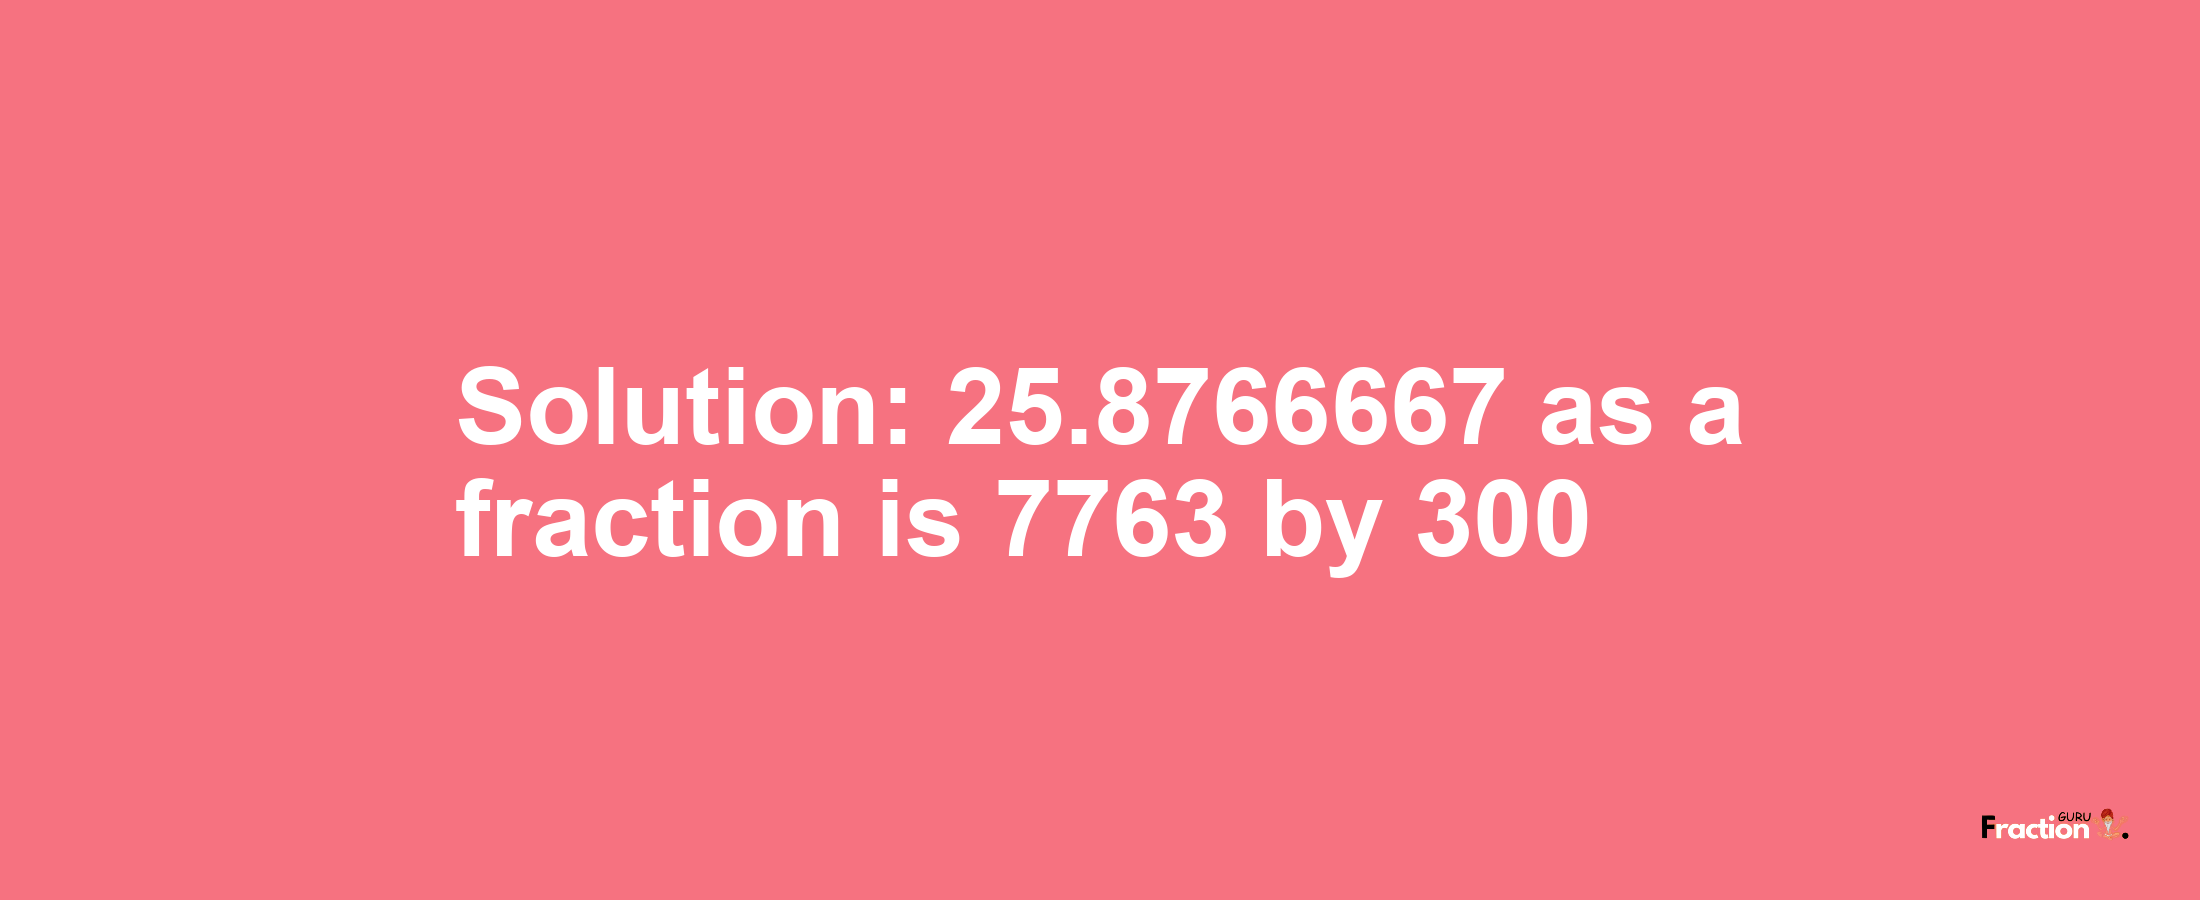 Solution:25.8766667 as a fraction is 7763/300